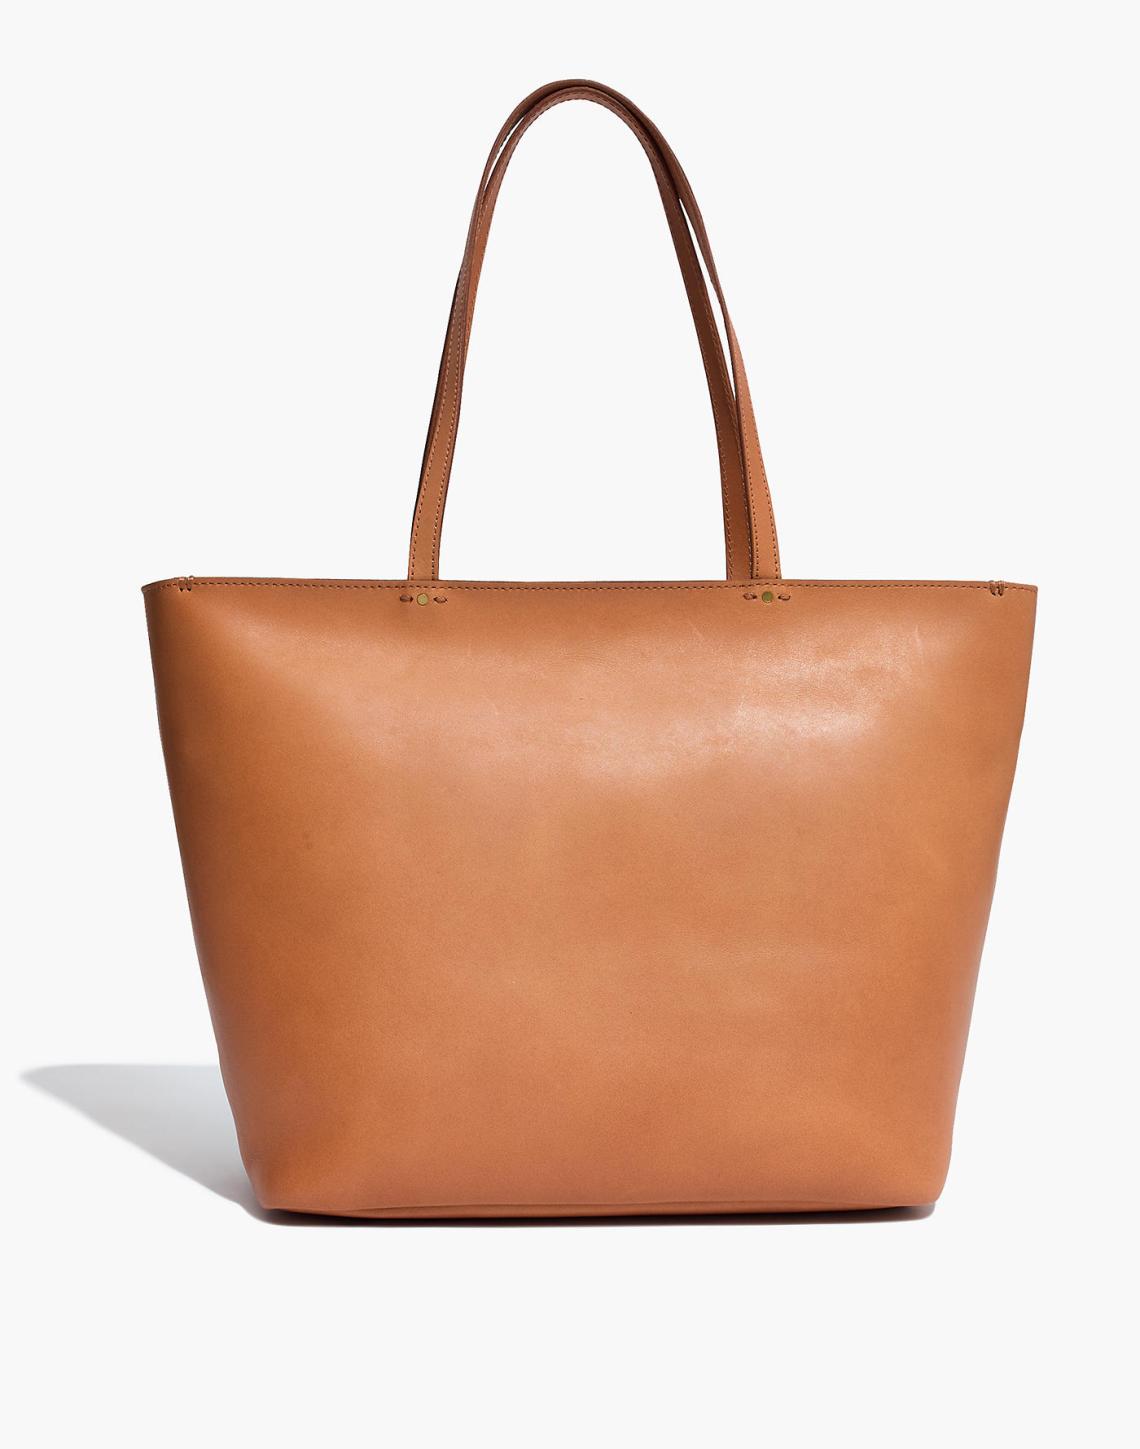 Madewell Abroad Tote